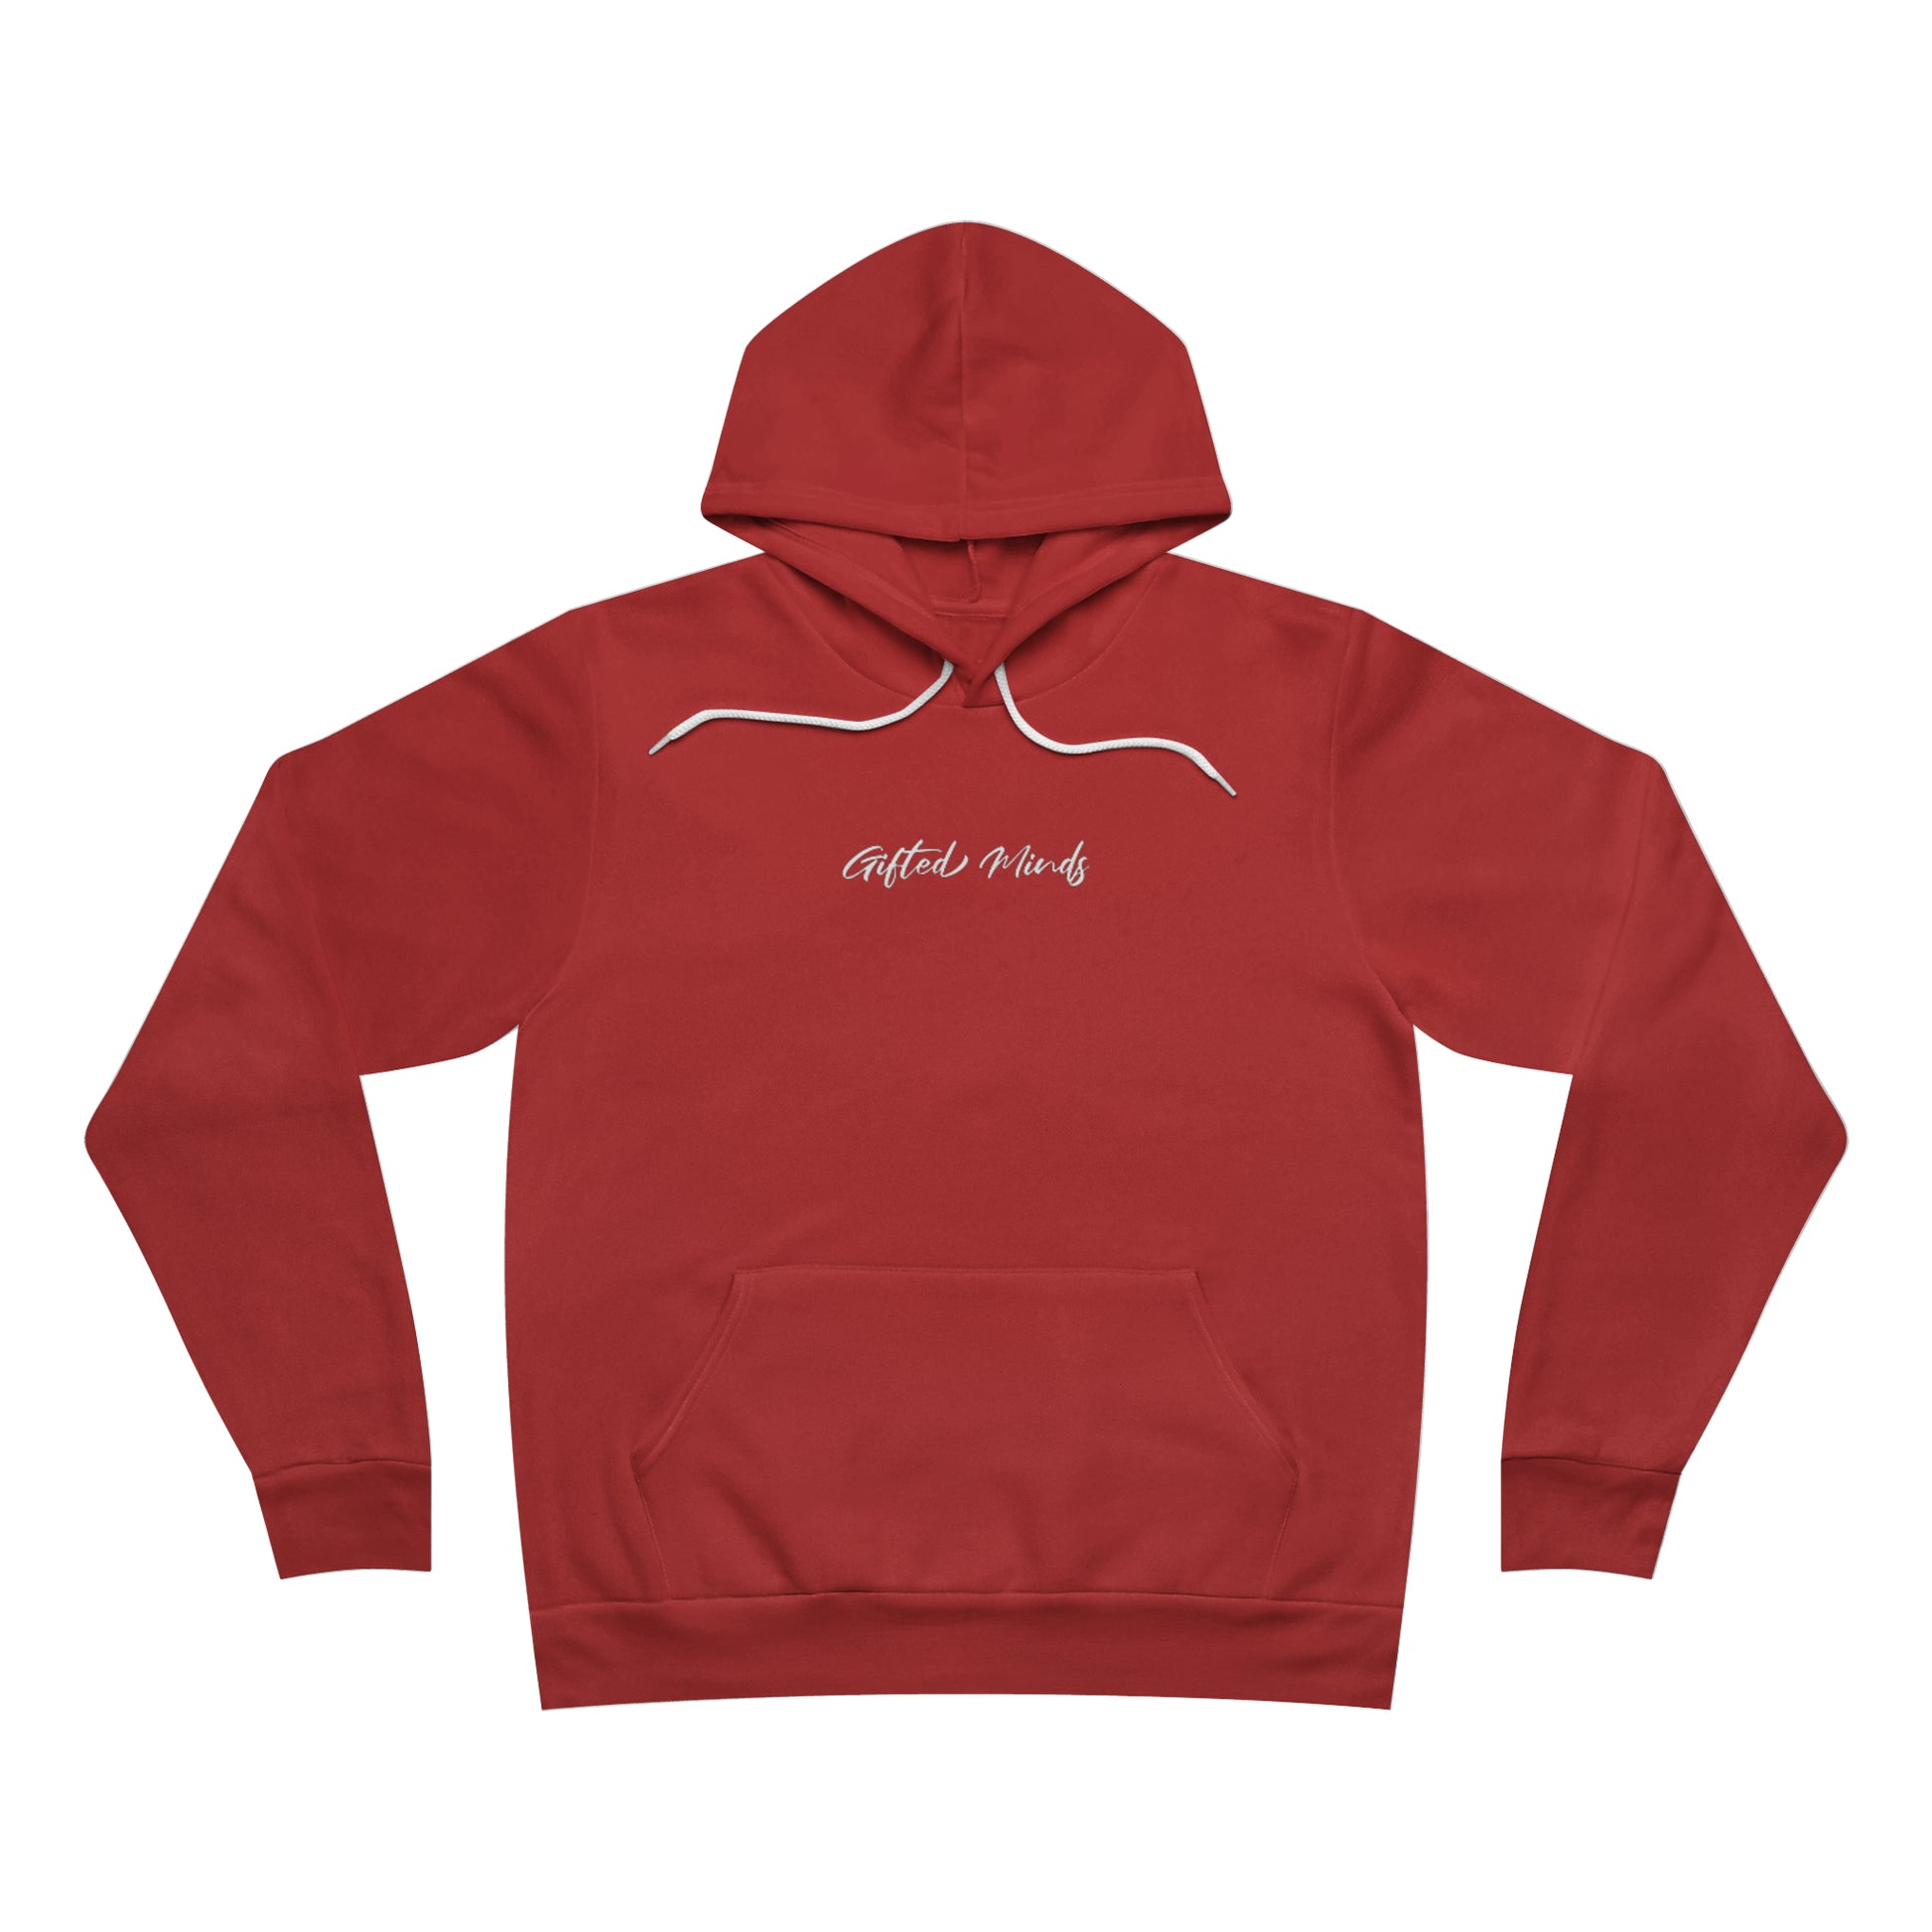 Gifted Minds Fleece Pullover Hoodie - GFTD MNDS